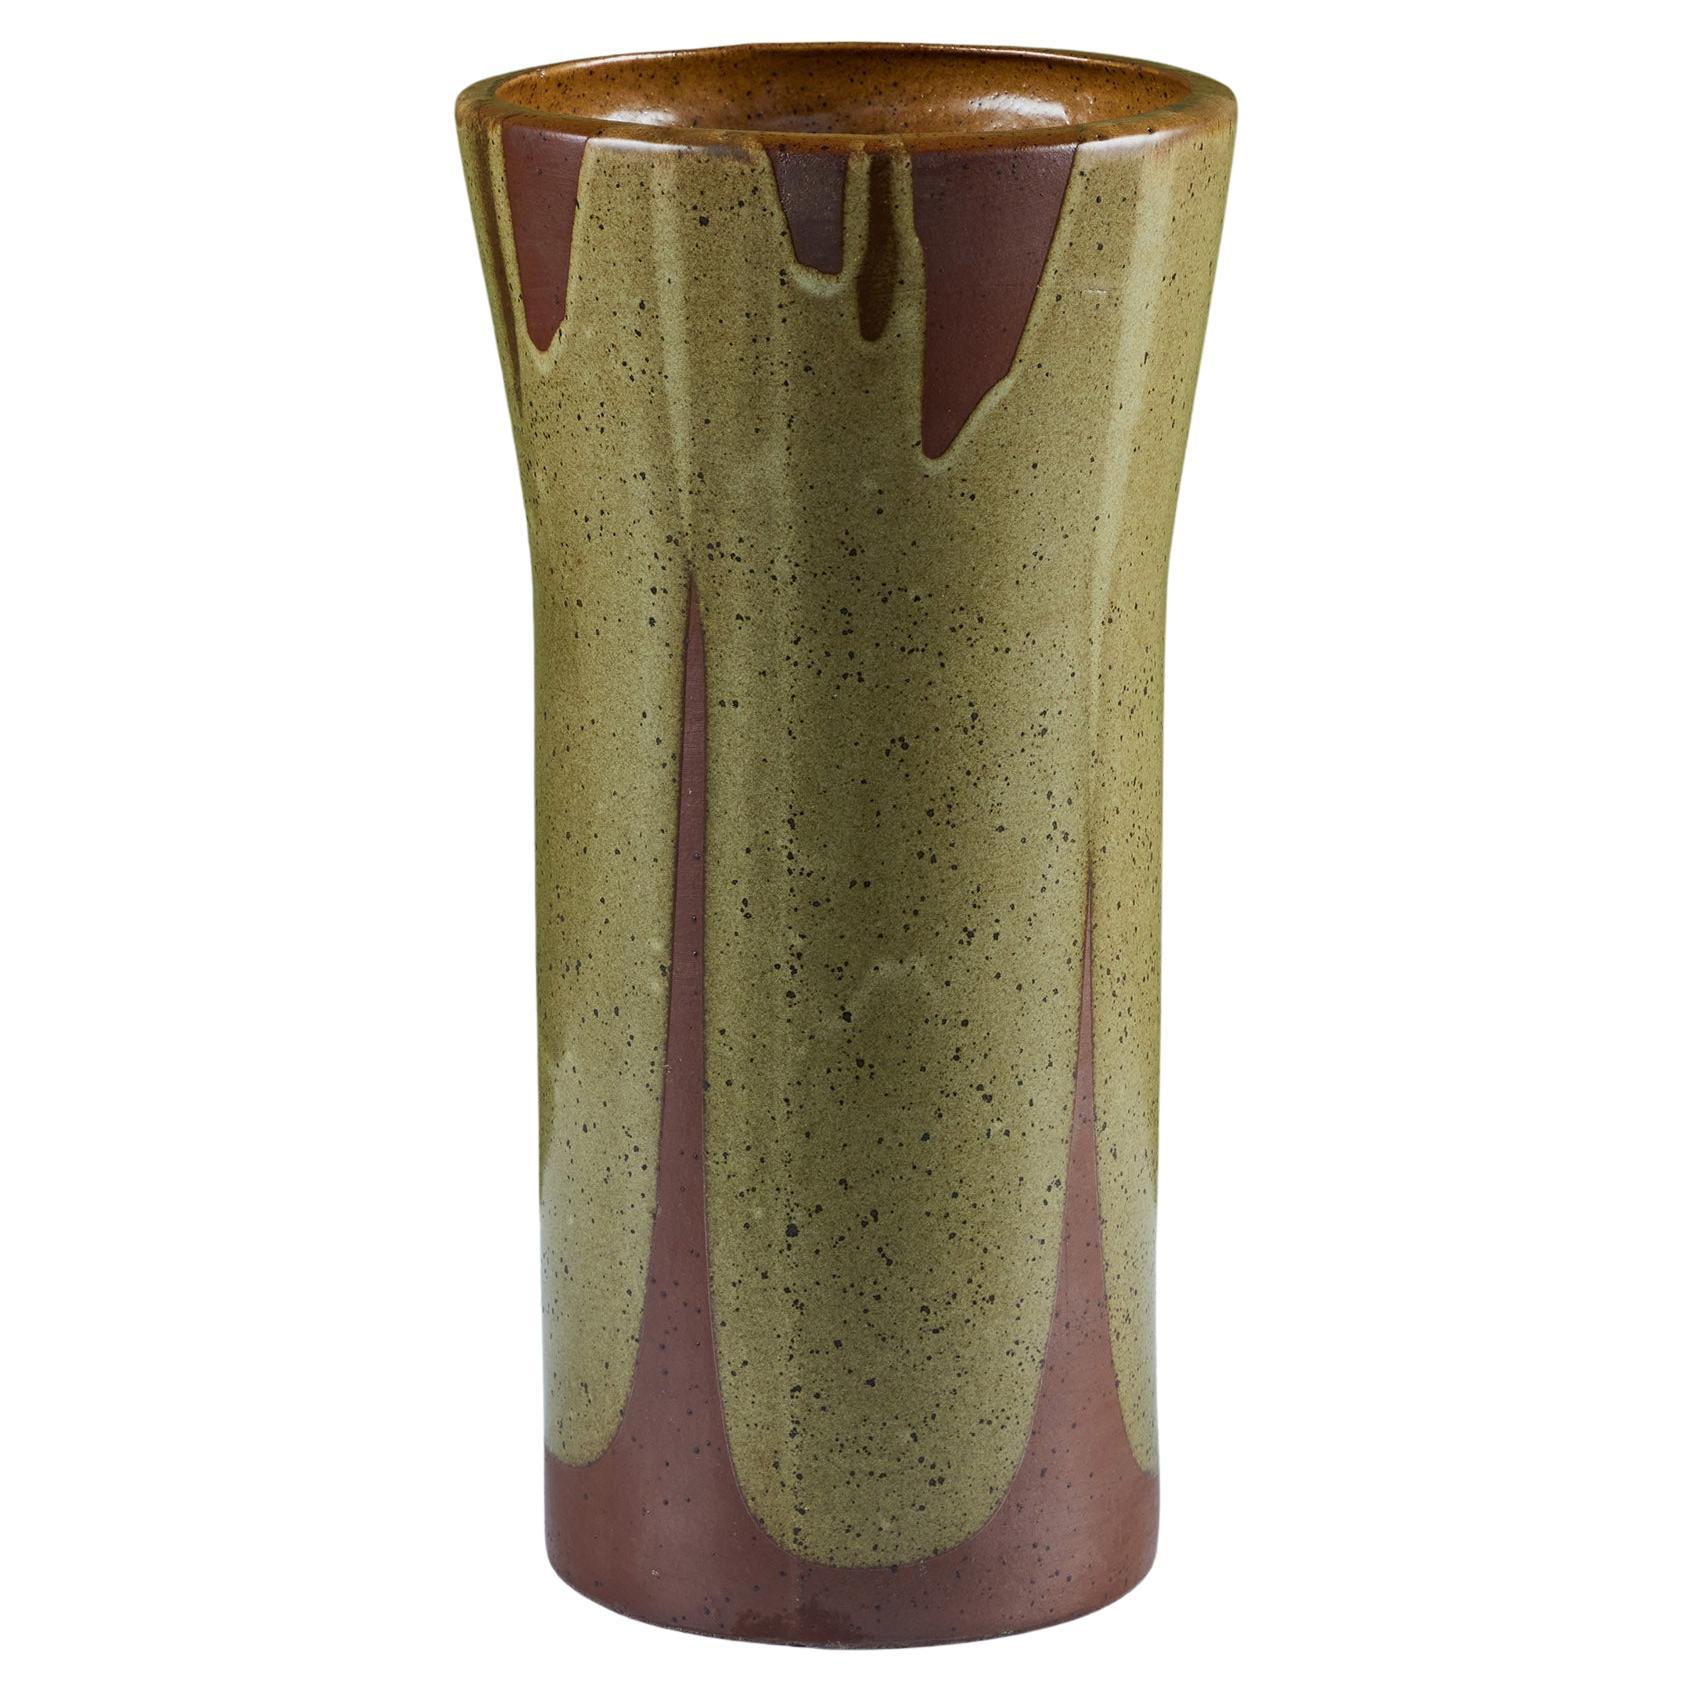 David Cressey Pro/Artisan Flame-Glaze Urn for Architectural Pottery For Sale